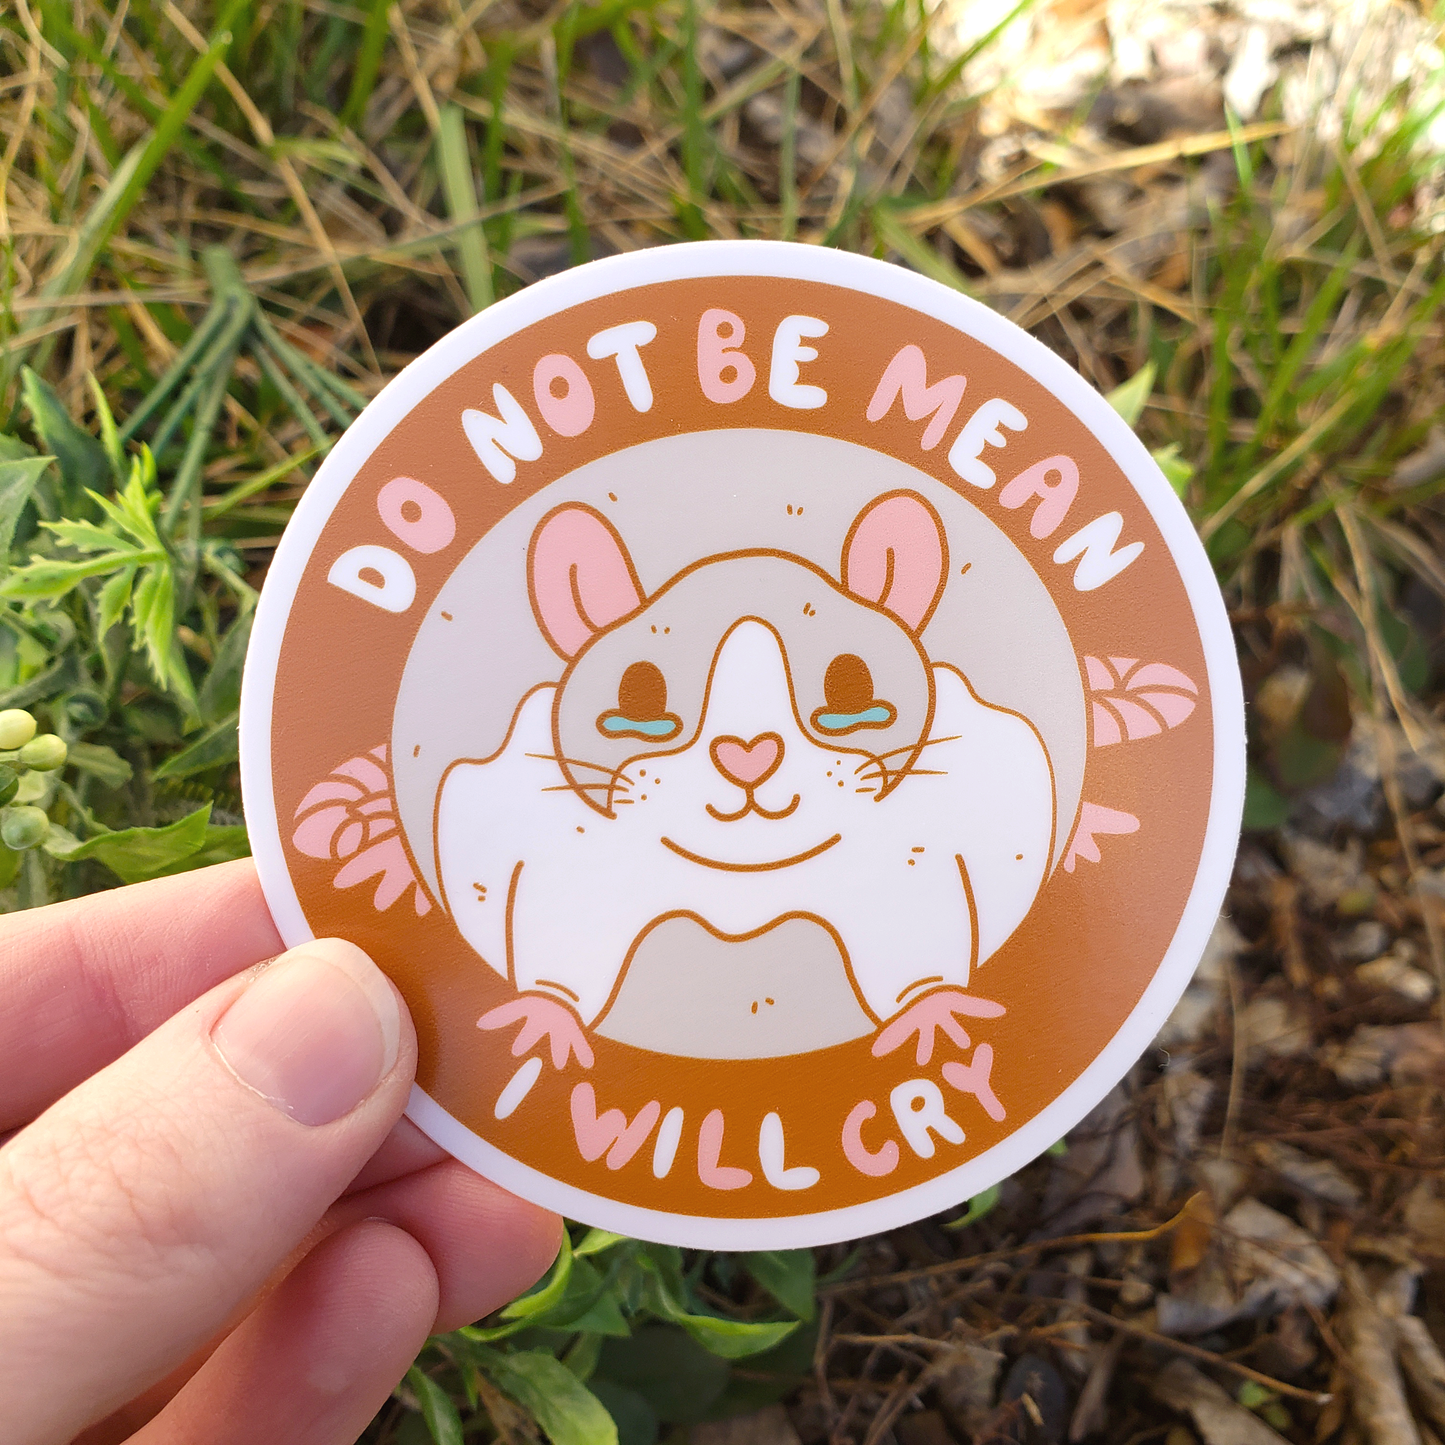 Rat 'Do Not be Mean, I will Cry' Sticker